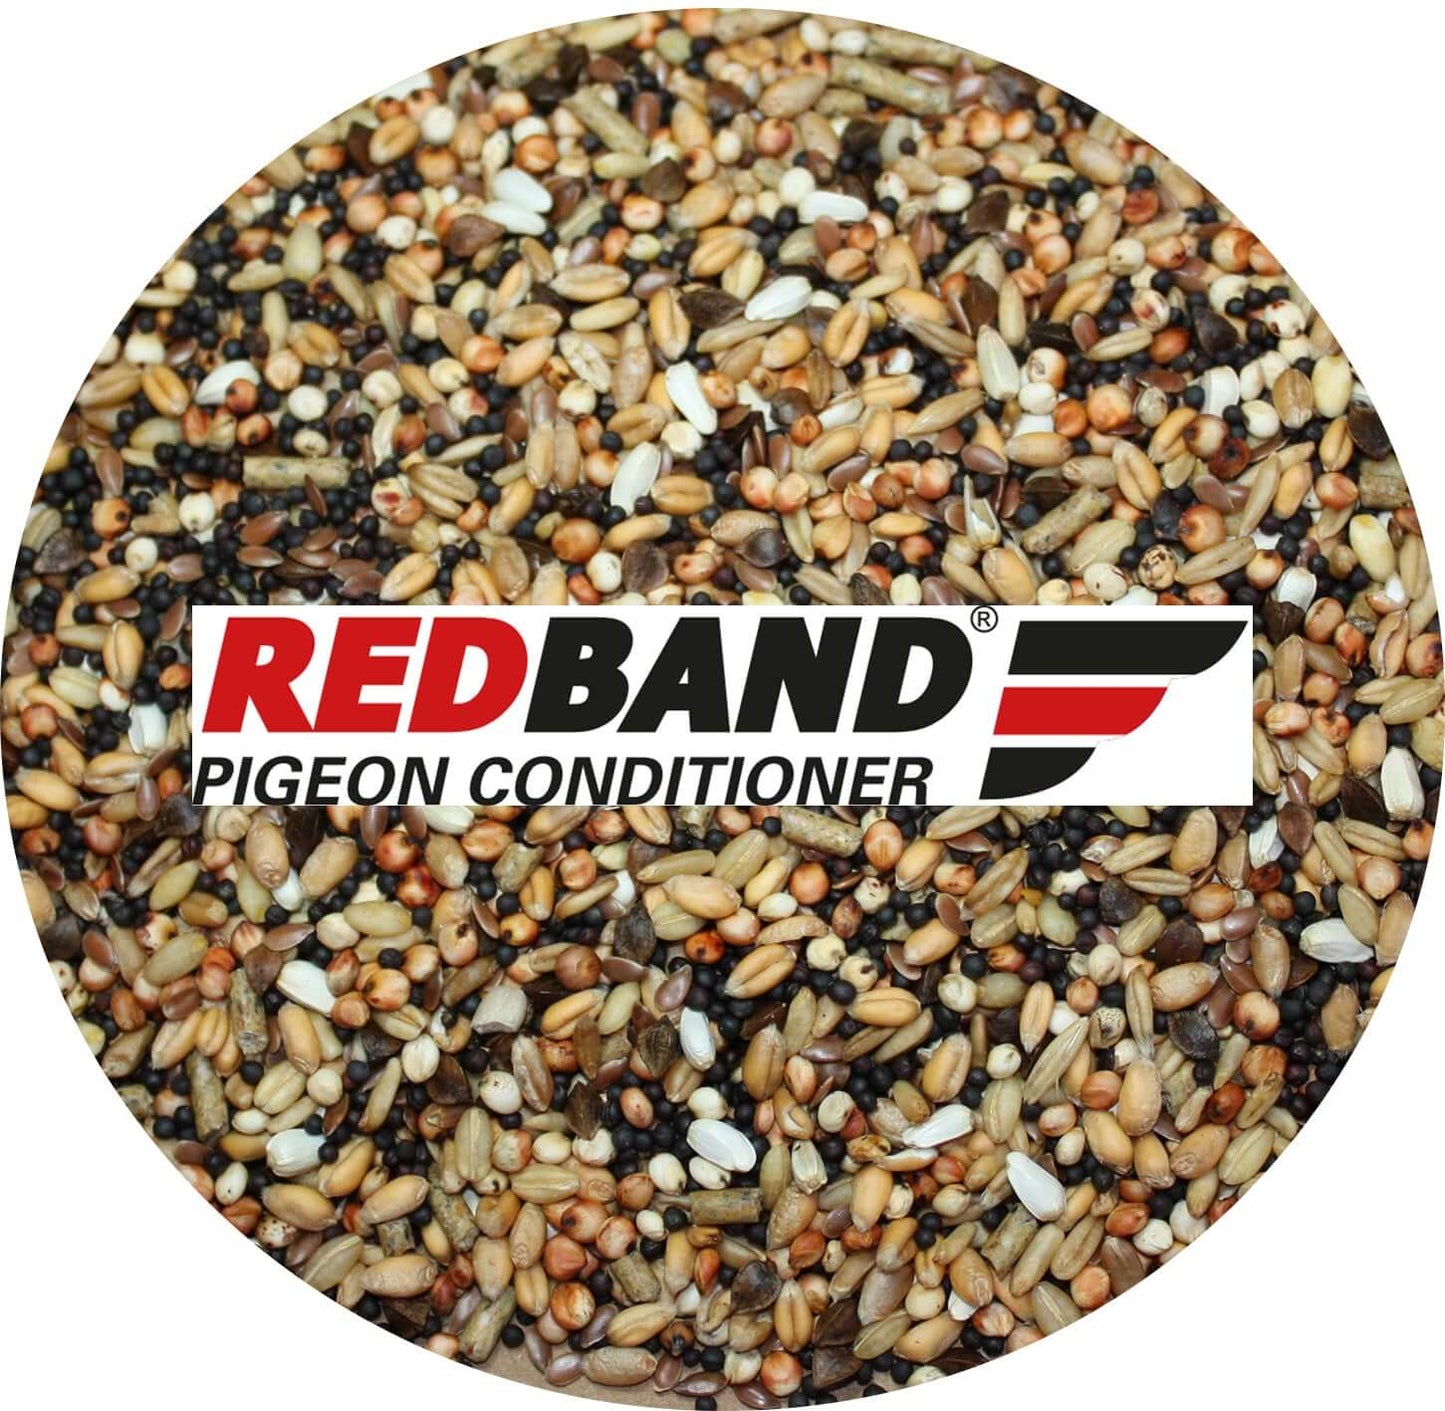 Haith's world-famous Red Band® Pigeon Conditioner,  SuperClean seeds, premium bait ingredient.